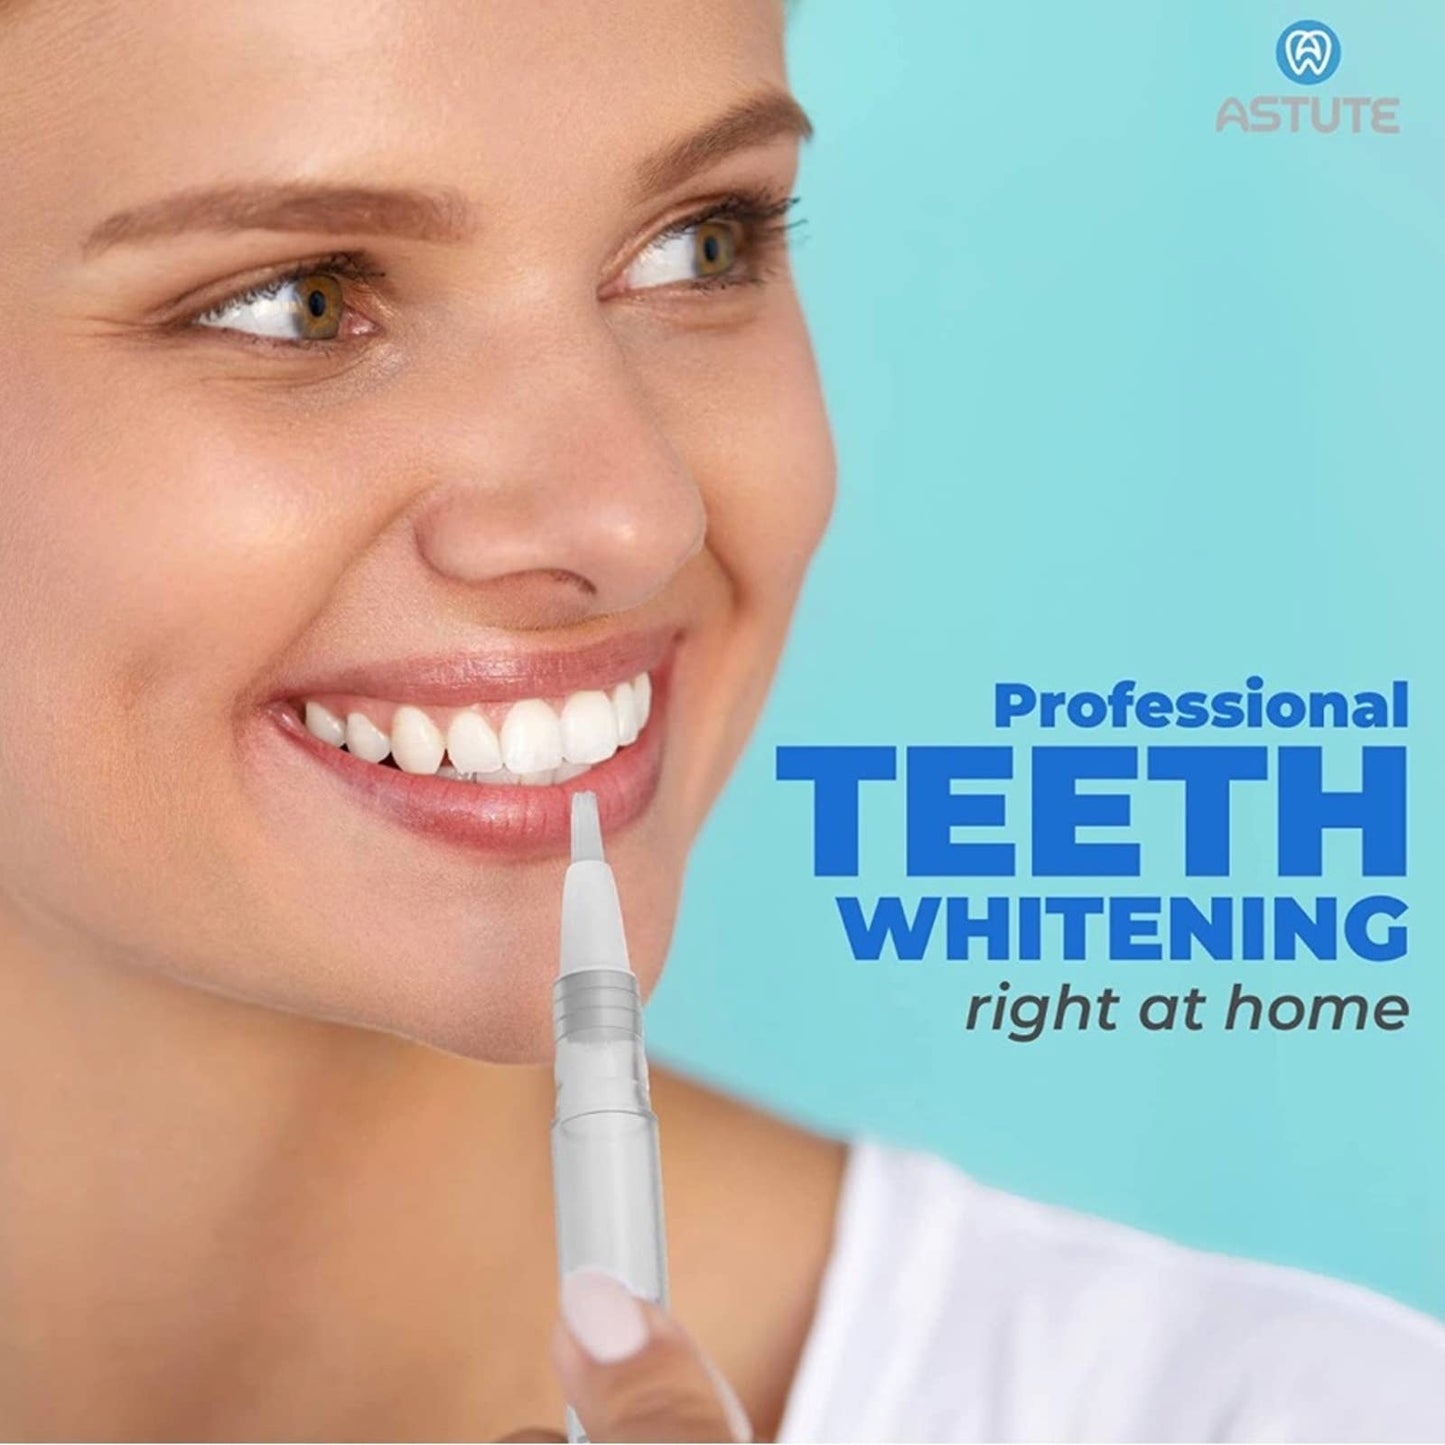 Astute Teeth Instant Tooth Whitener Pen with Up to 35 Treatments (2 pens)